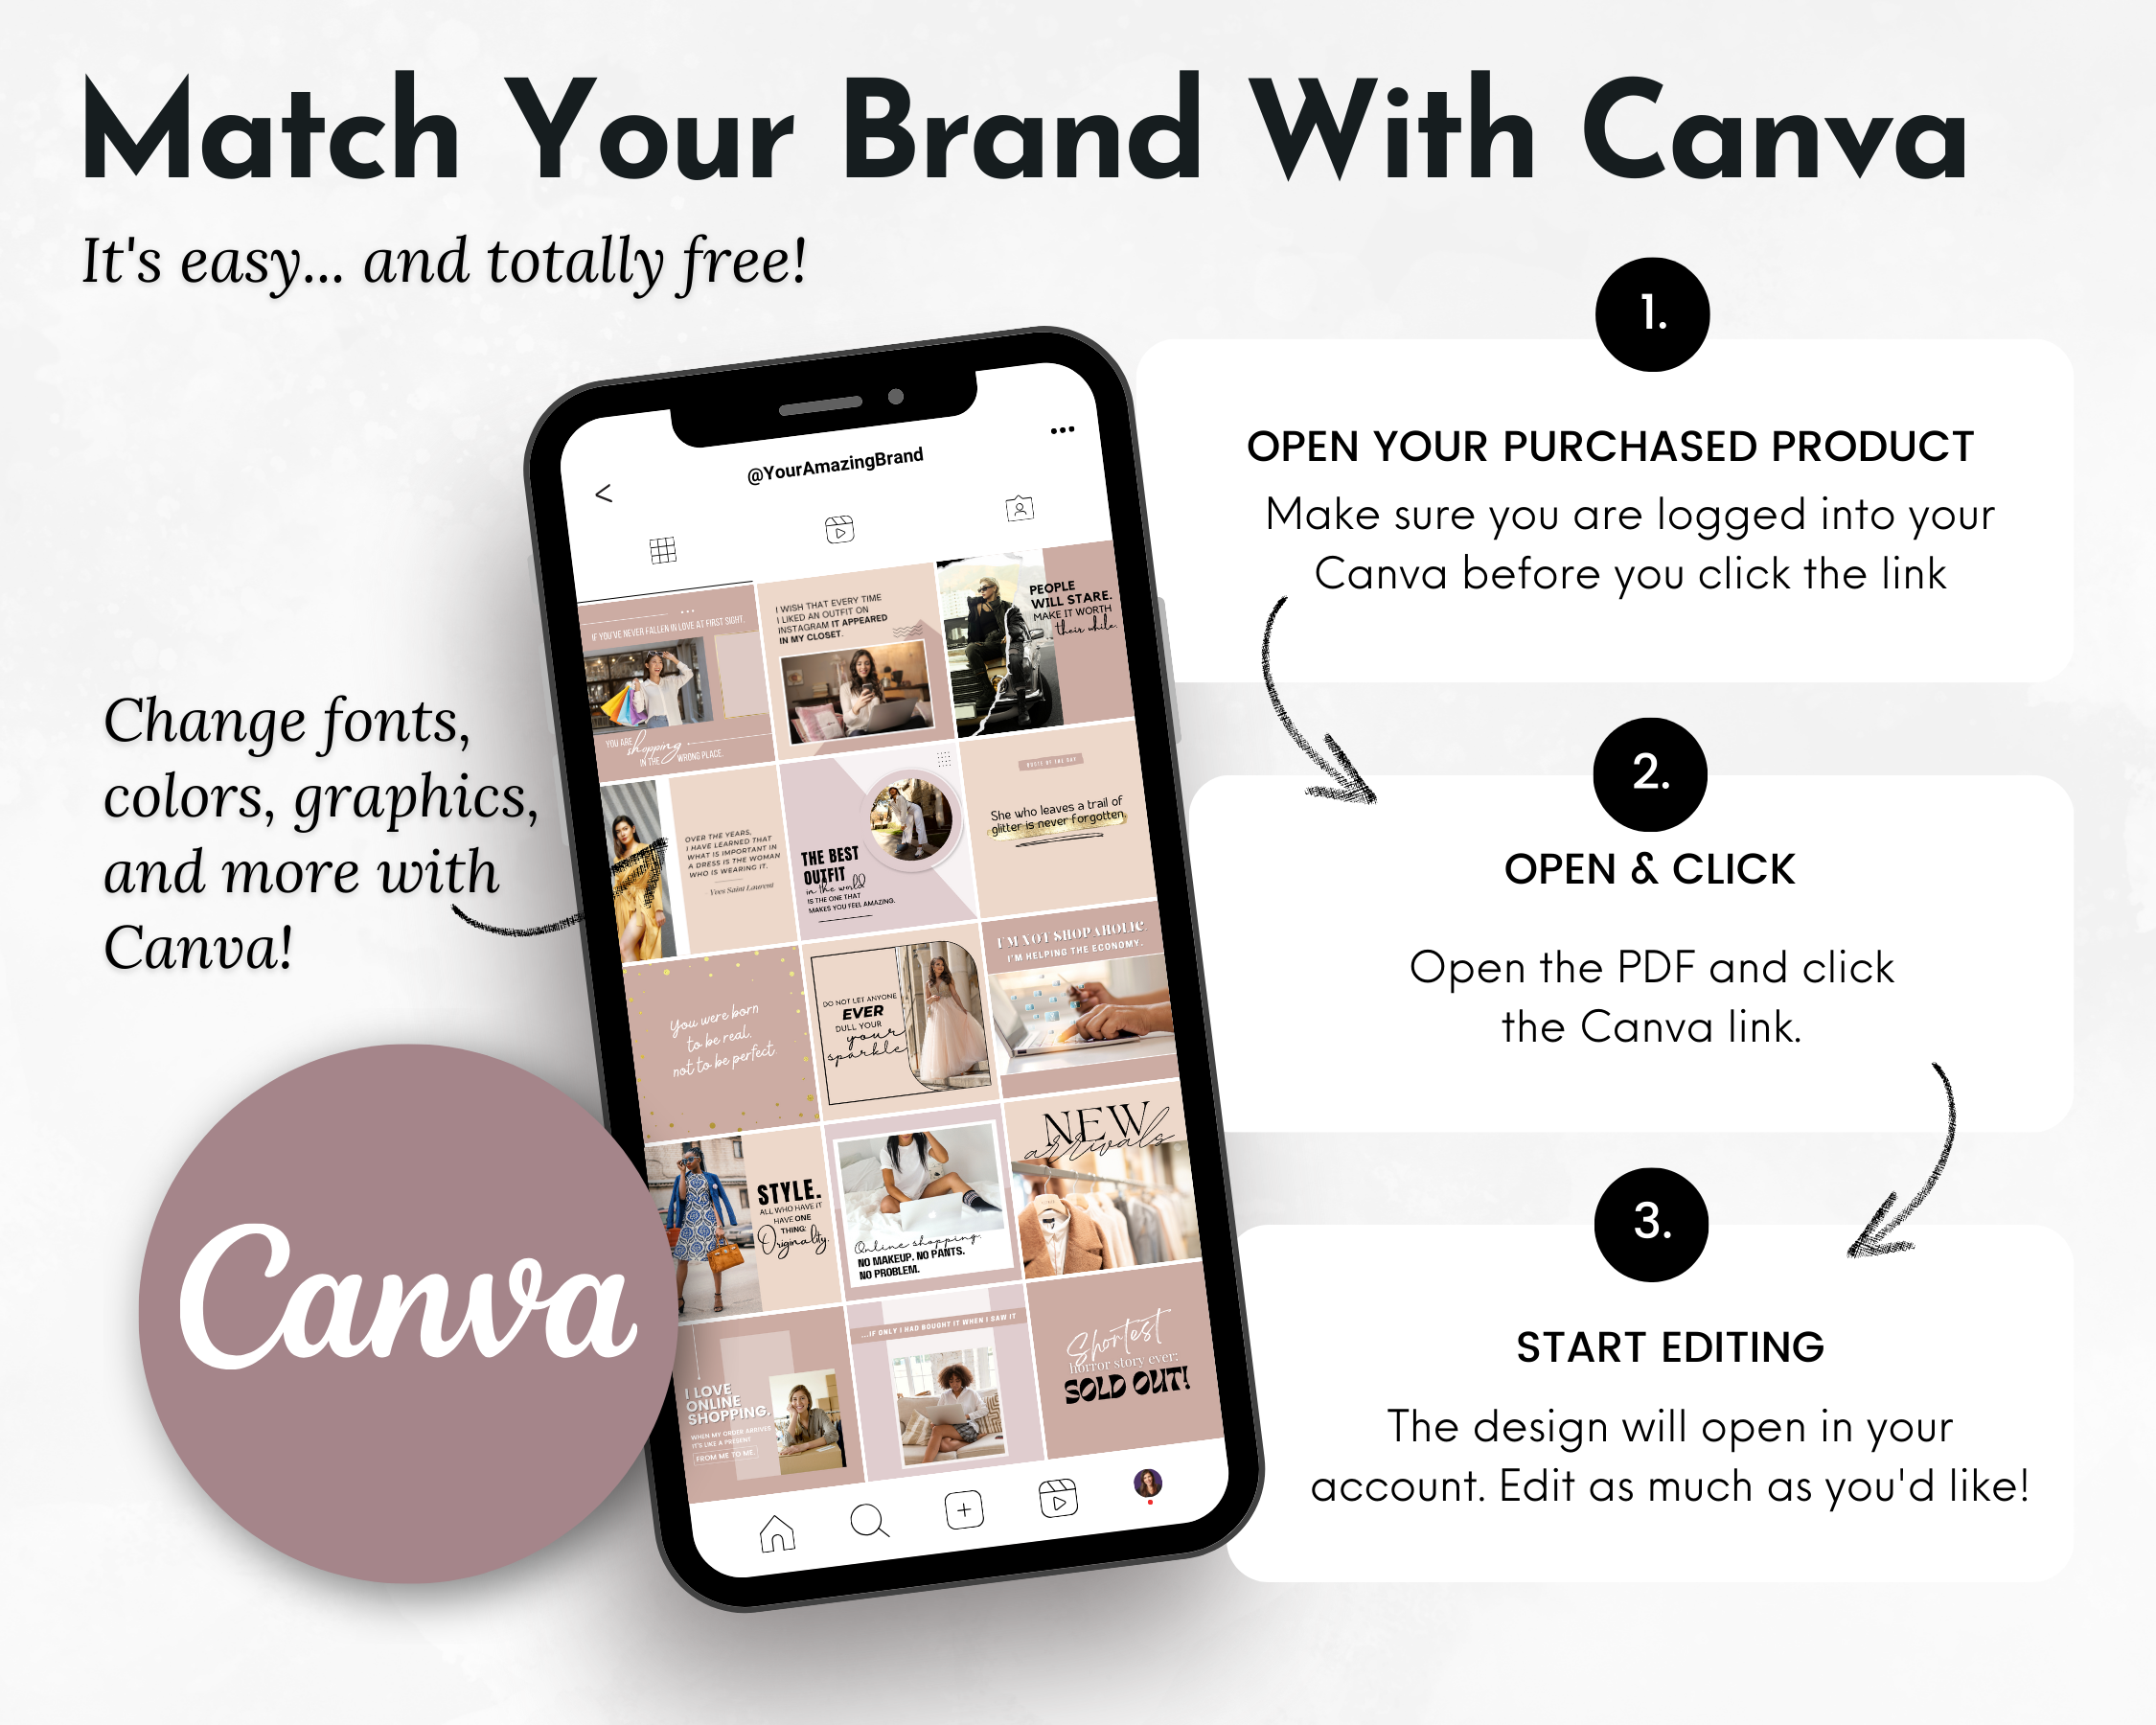 Pair your brand, Socially Inclined, with canvas and connect with clothing & fashion influencers. Generate buzz for your handmade creations using captivating social media images and craft ready-to-post text captions with the Boutique & Style Store Social Media Post Bundle, equipped with Canva Templates.